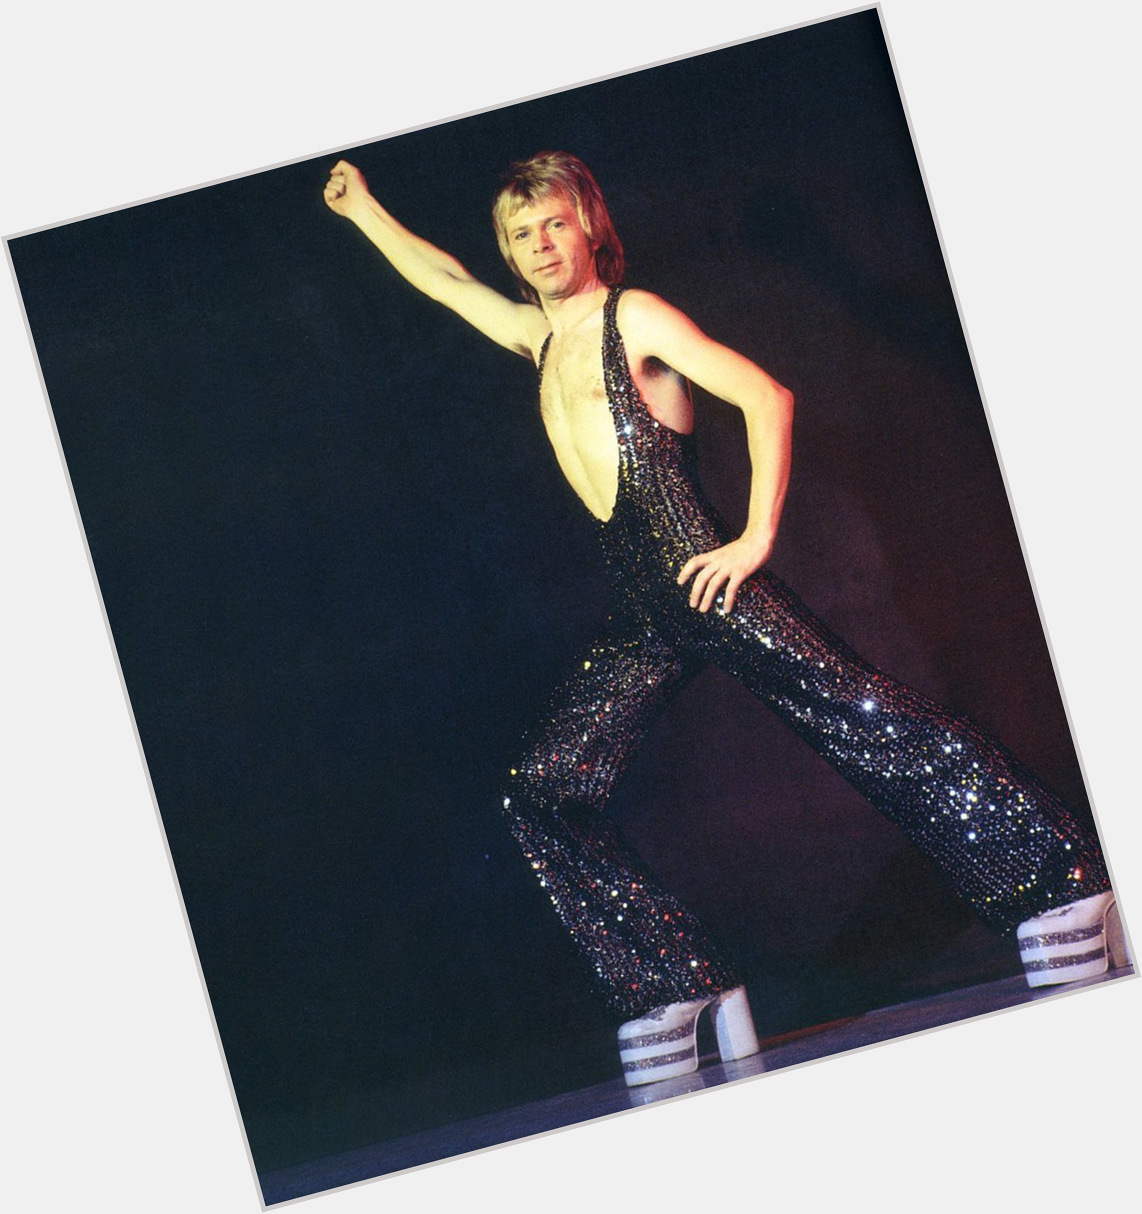 Happy birthday ABBA powerhouse Bjorn Ulvaeus! Thank you for the music, and for being a fierce advocate for lycra! 